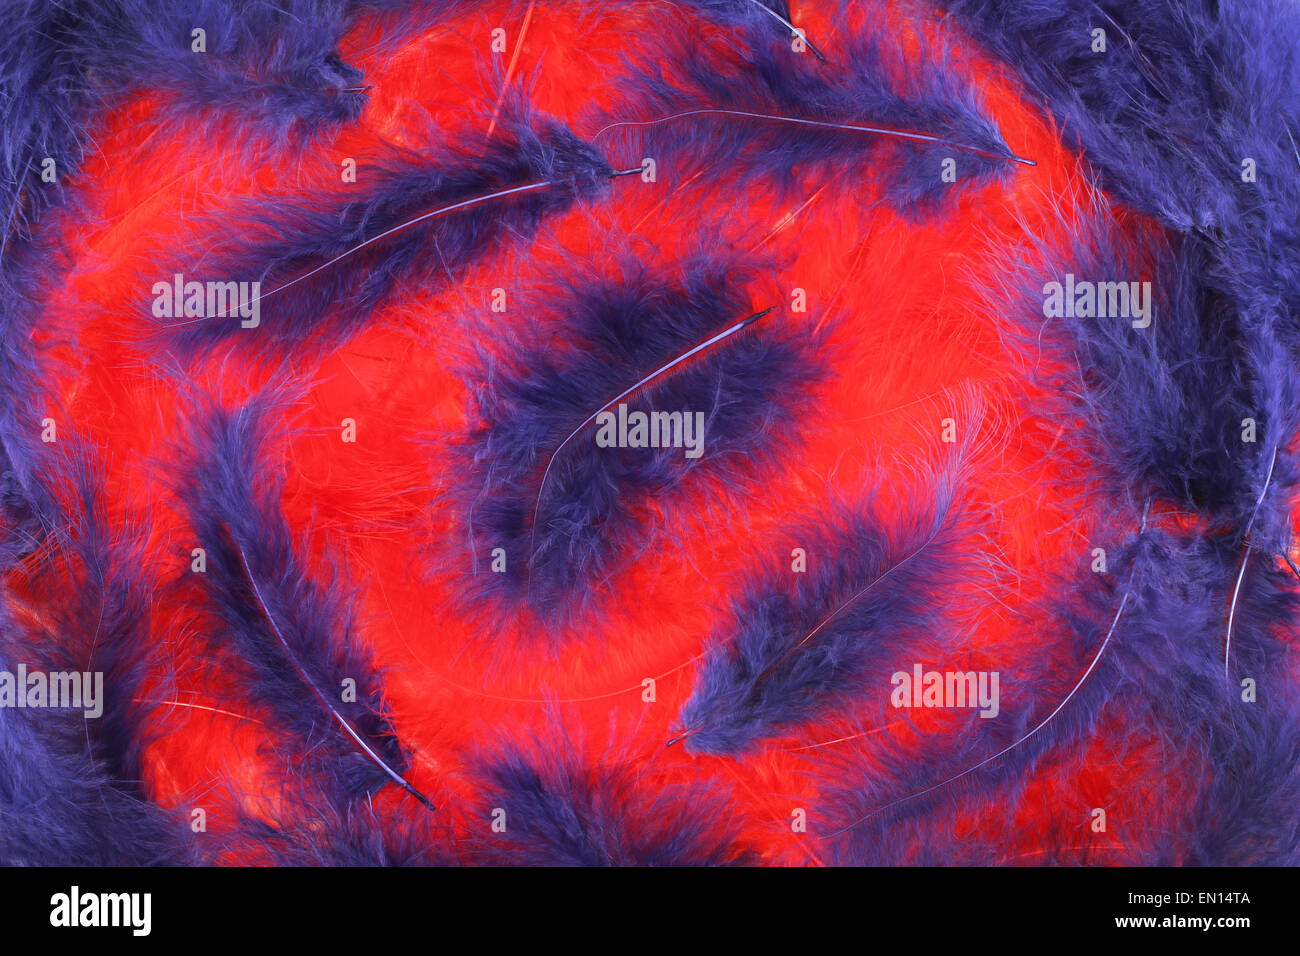 Red and blue plumes background Stock Photo